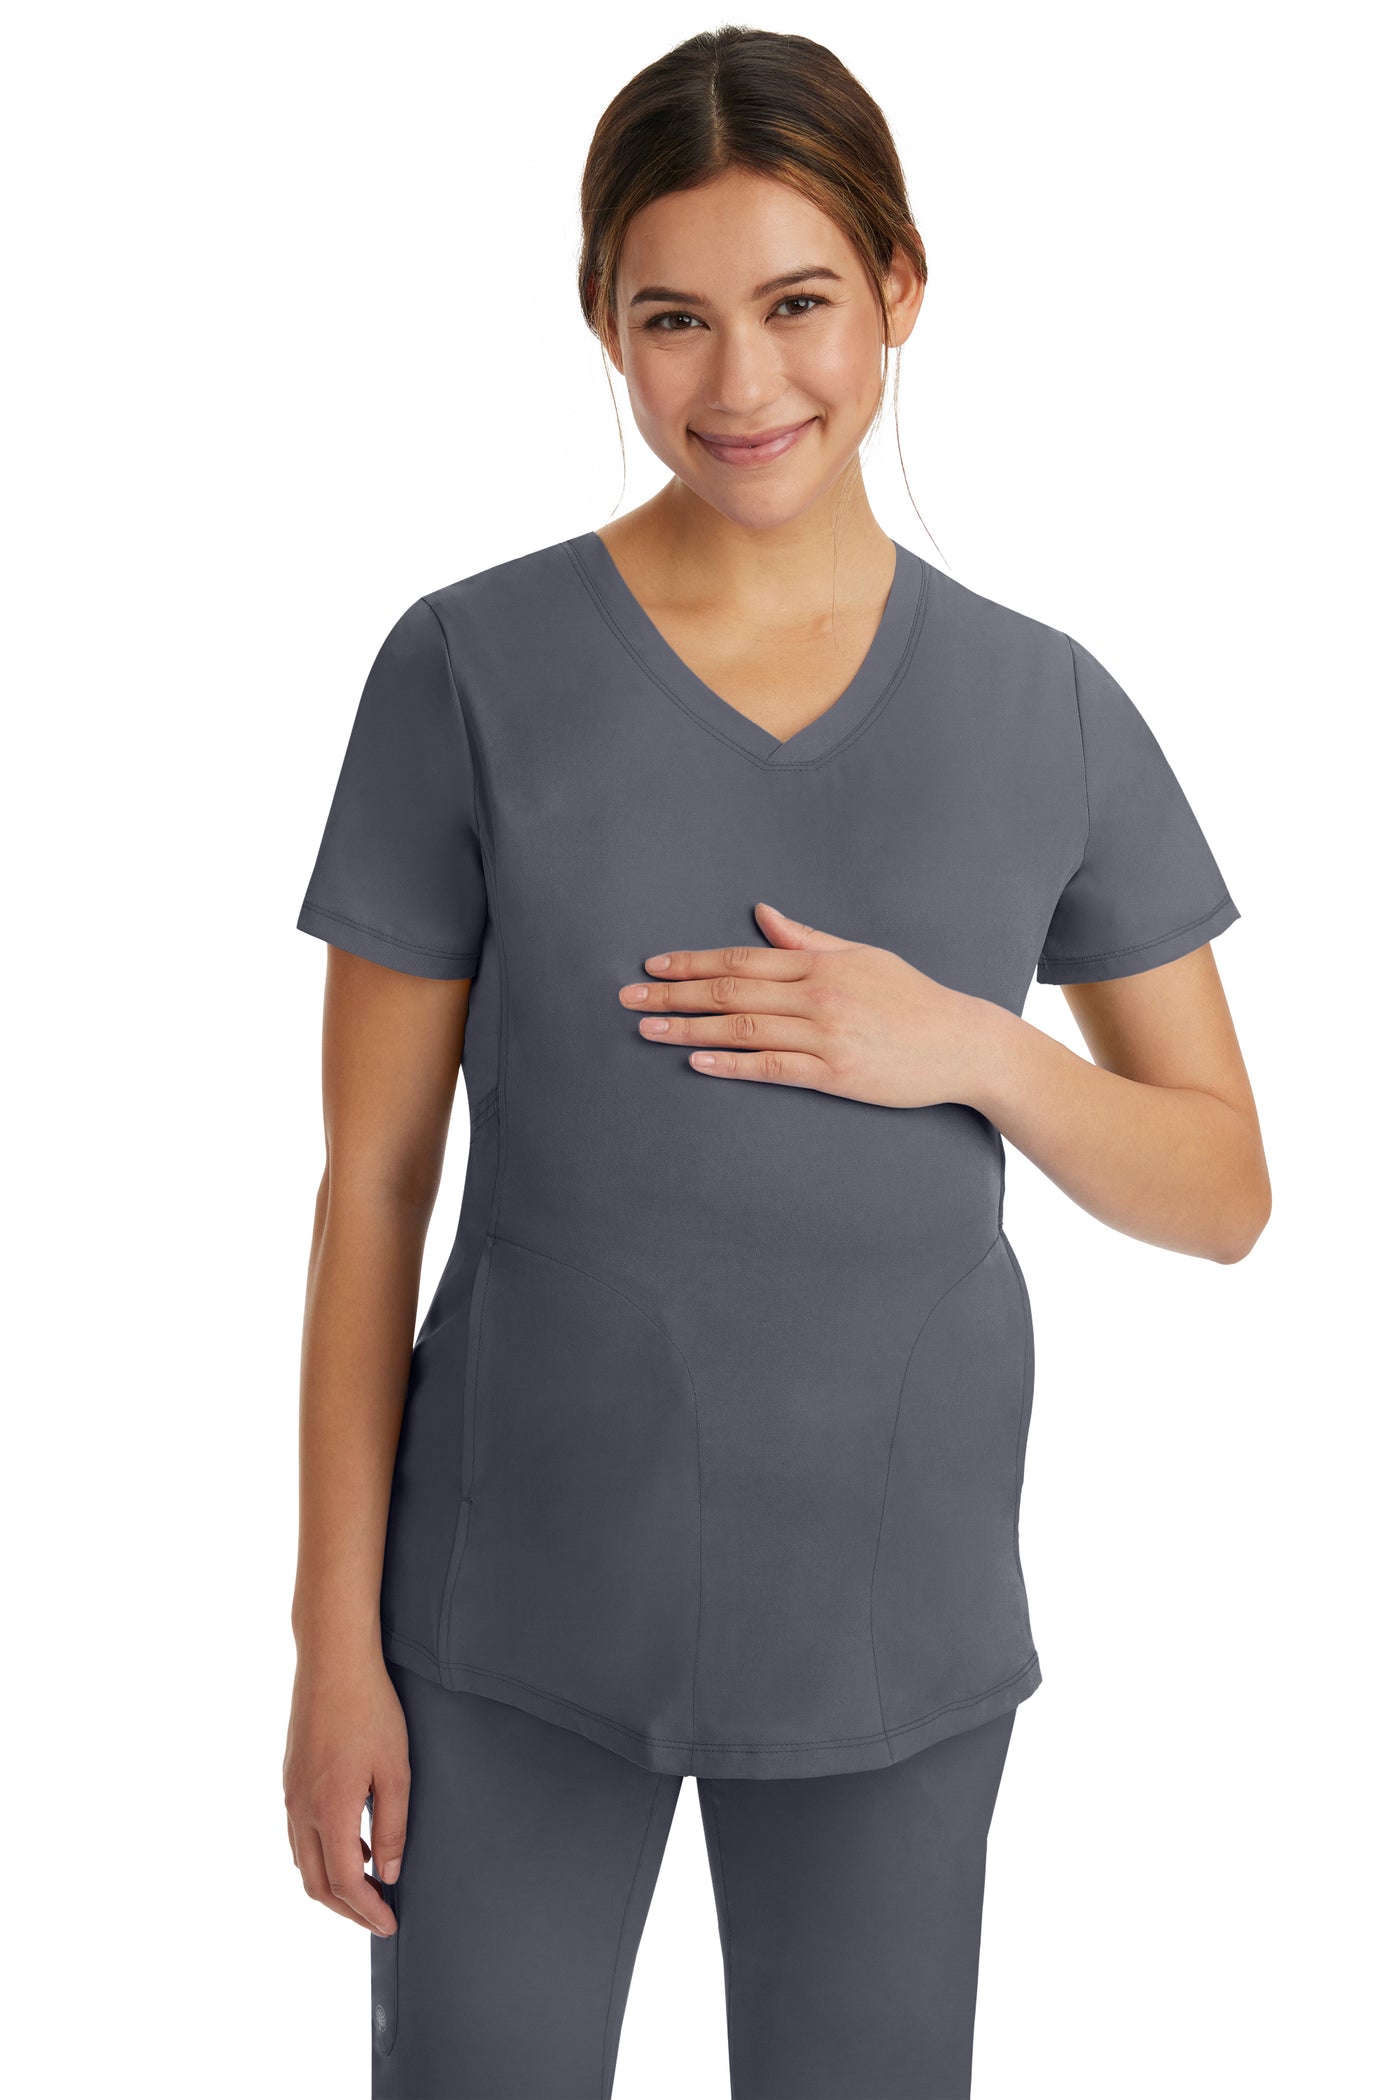 MILA MATERNITY TOP by Healing Hands XXS-5XL/ PEWTER